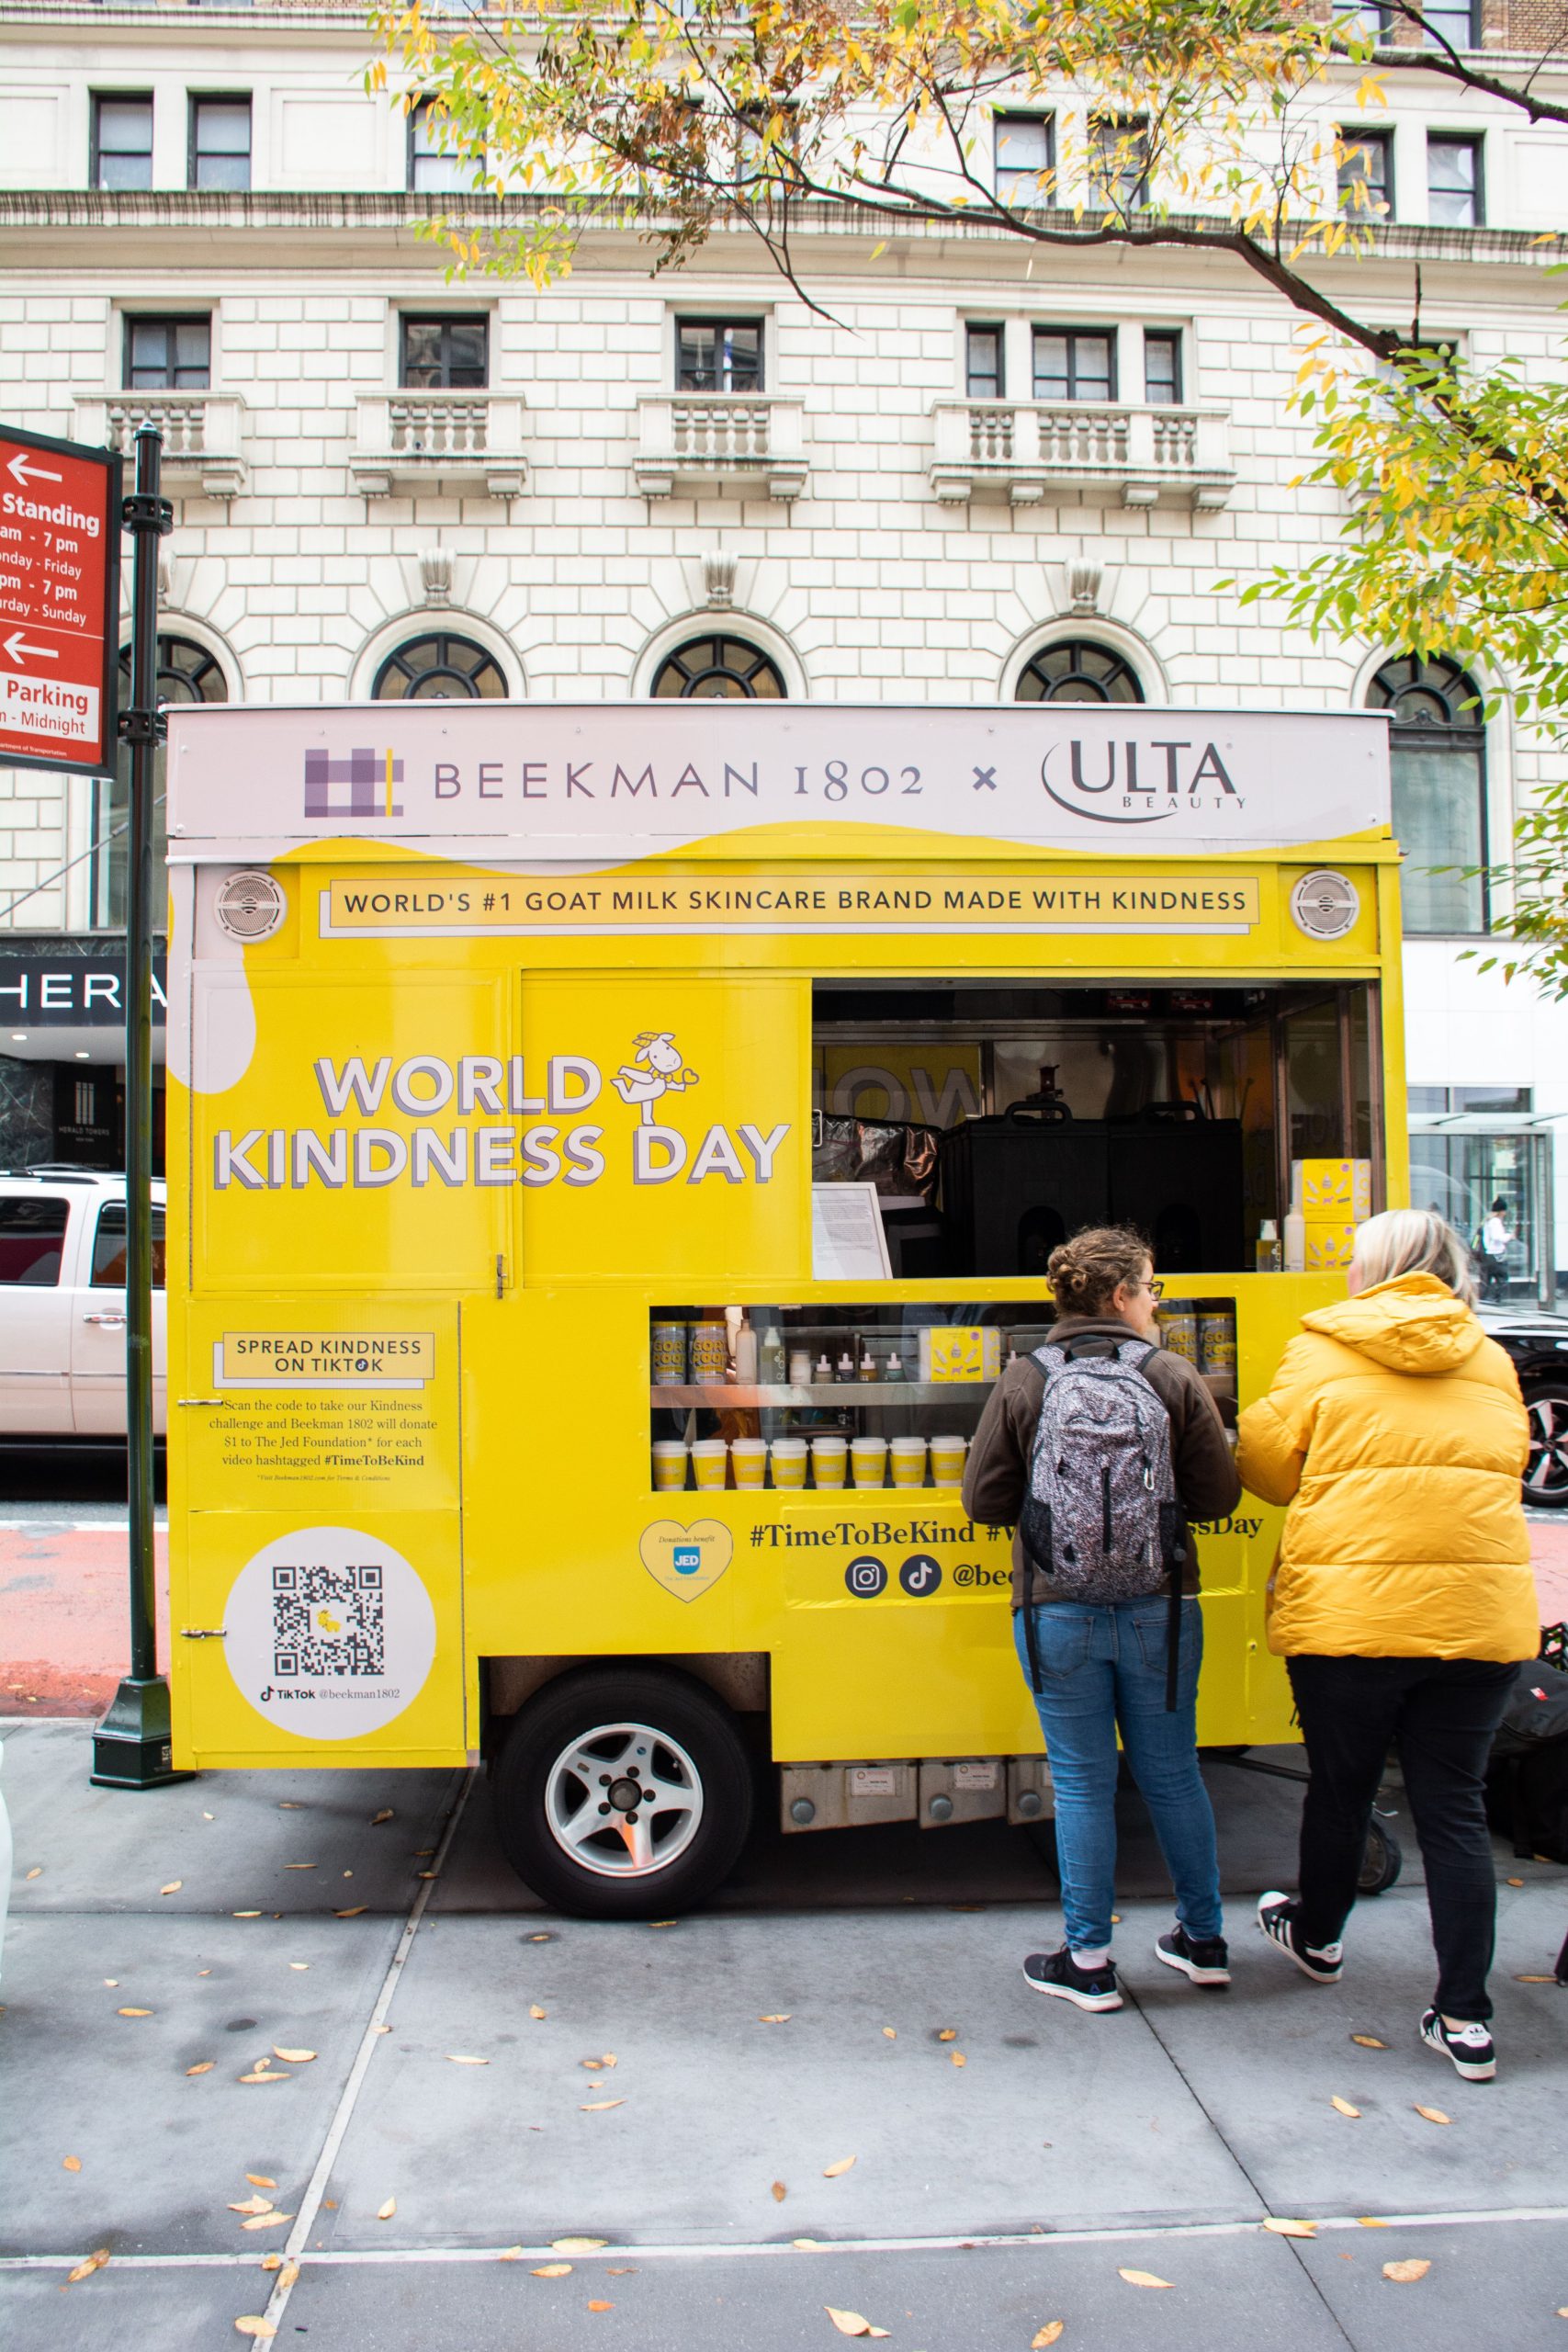 World Kindness Day promotion for Beekman 1802.